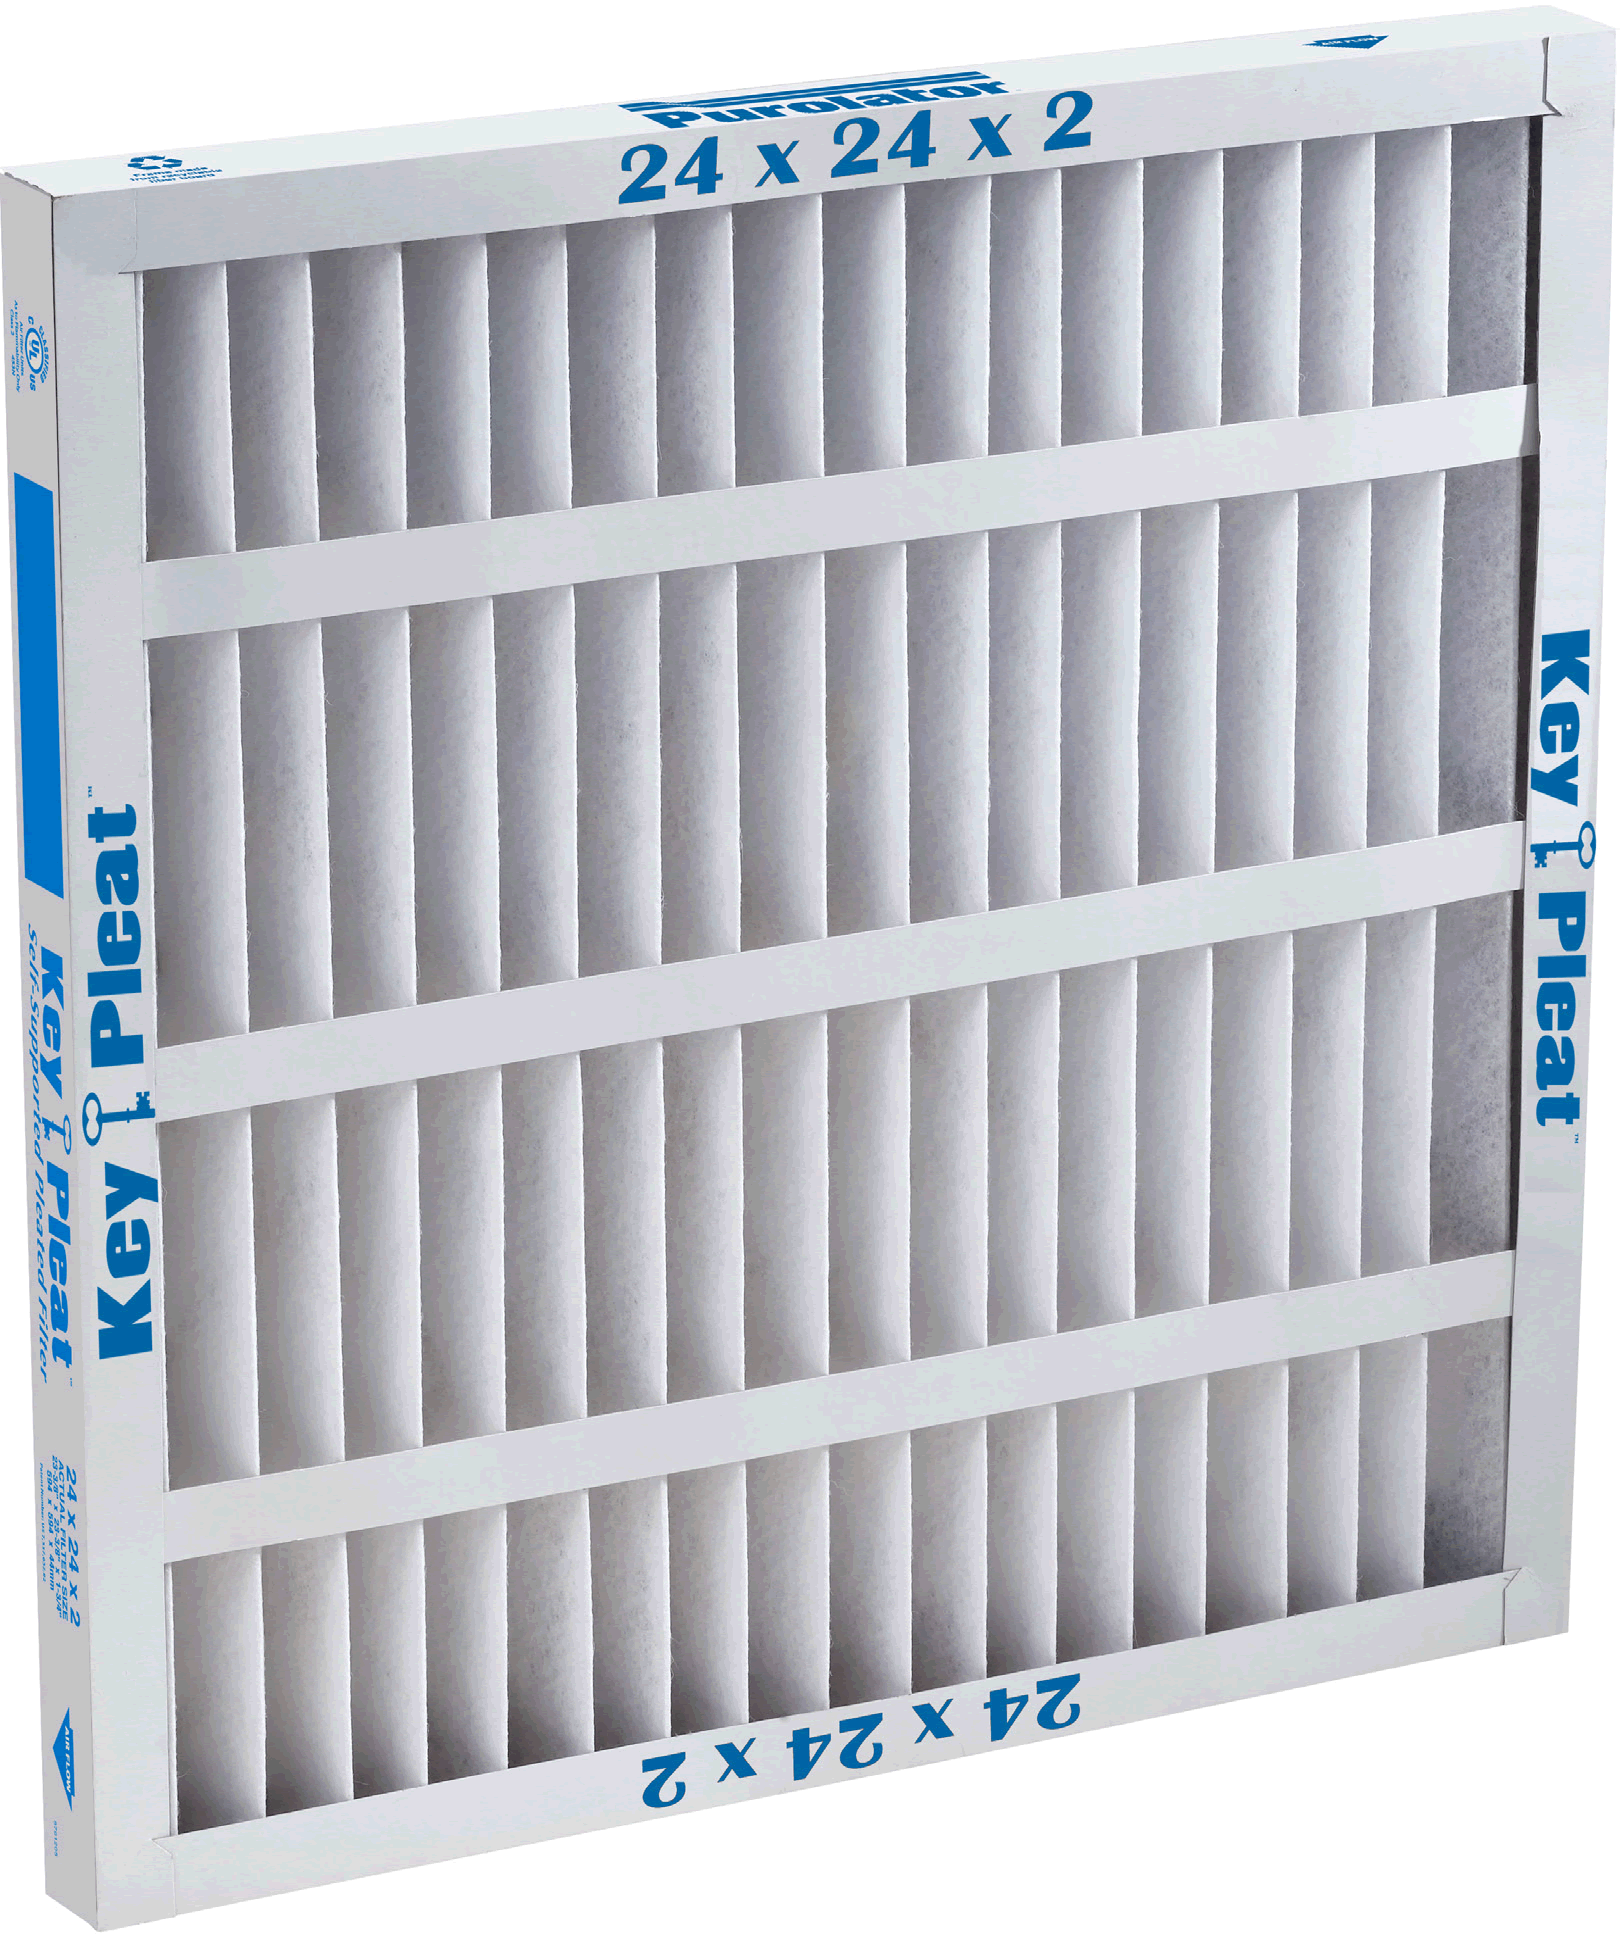 Sterling Seal SSI5251070884XCS Purolator Key Pleat Extended Surface Air filter by Mechanical MERV 8 Pack of 12 14 W x 25 H x 1 D 100% Synthetic filter Media Heavy Duty Beverage Board Frame